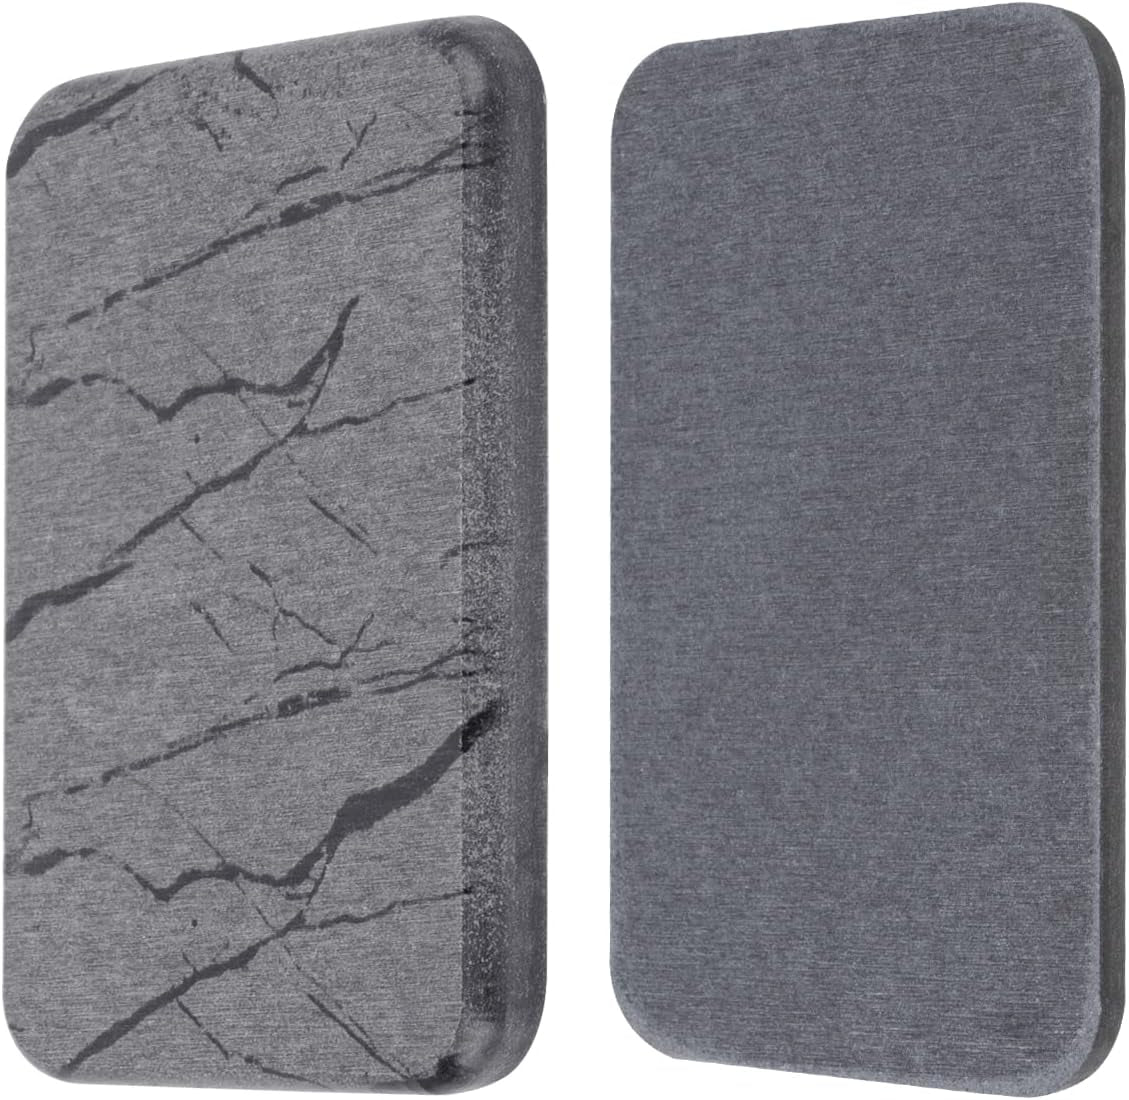 2 Pack Diatomite Soap Dish, Water Absorbent Diatomite Soap Holder Mat, Self-Dry Diatomaceous Soap Holder (Gray)